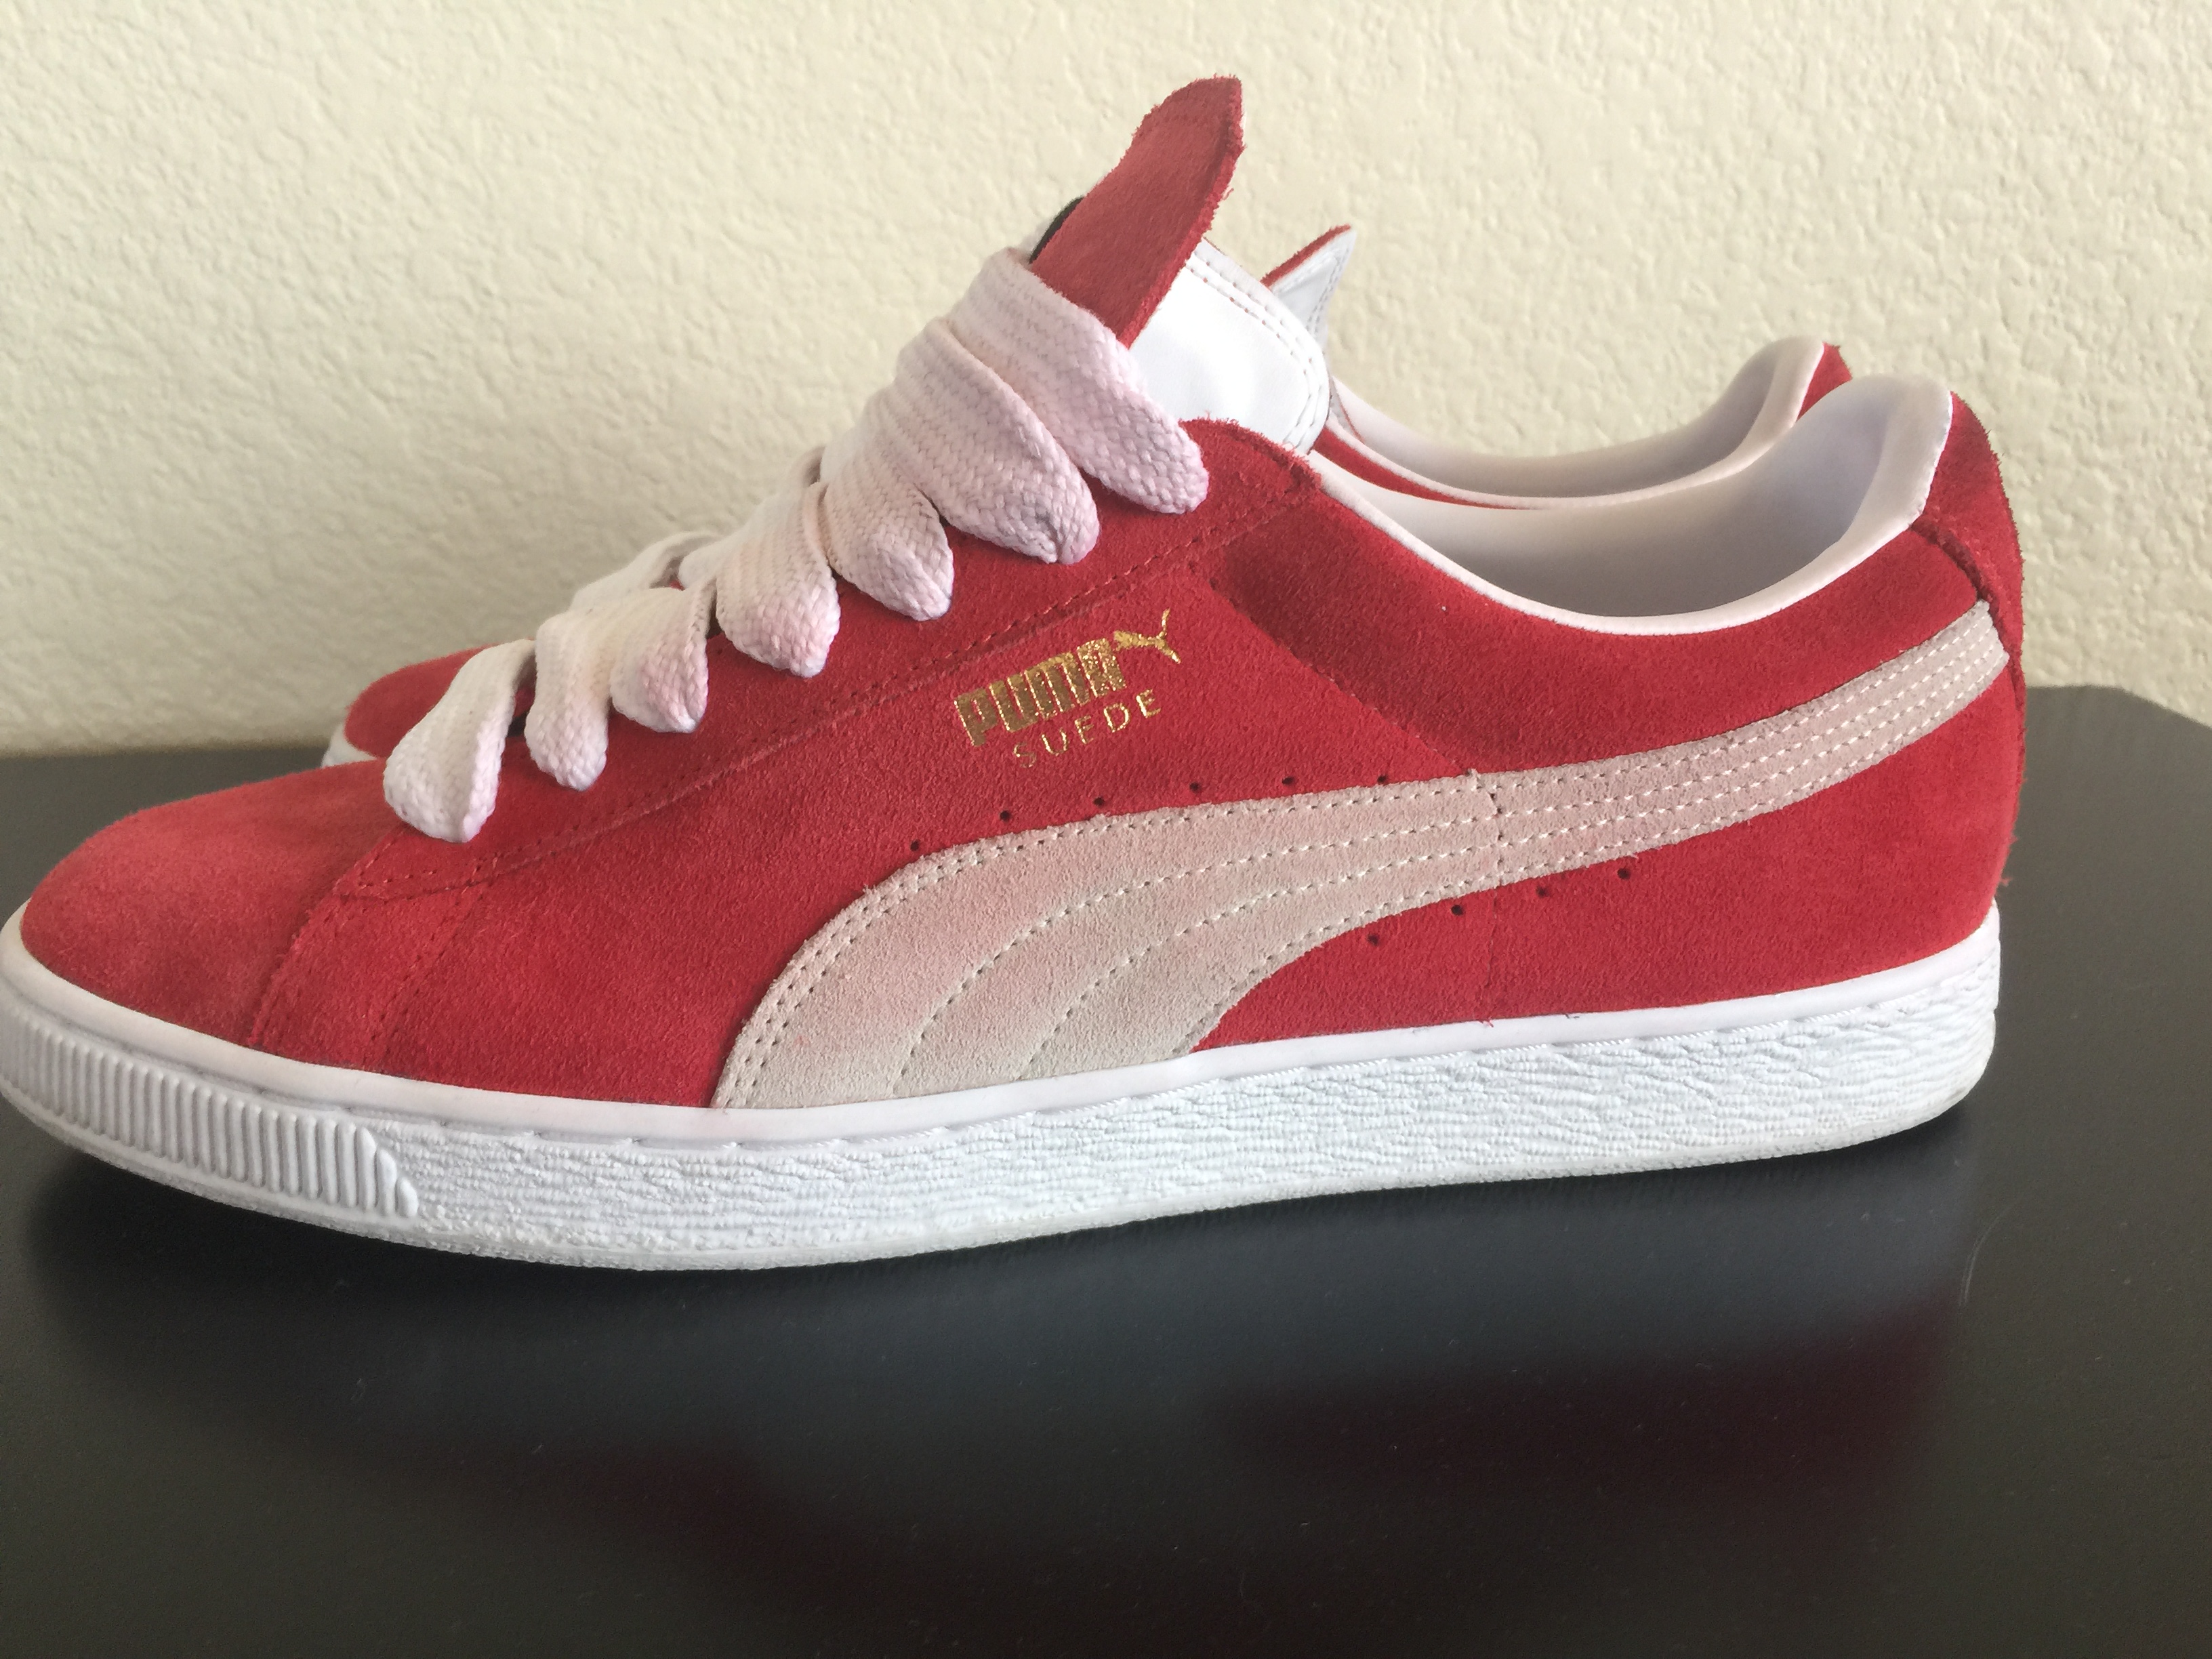 Guts To Wear Red Suede Pumas 